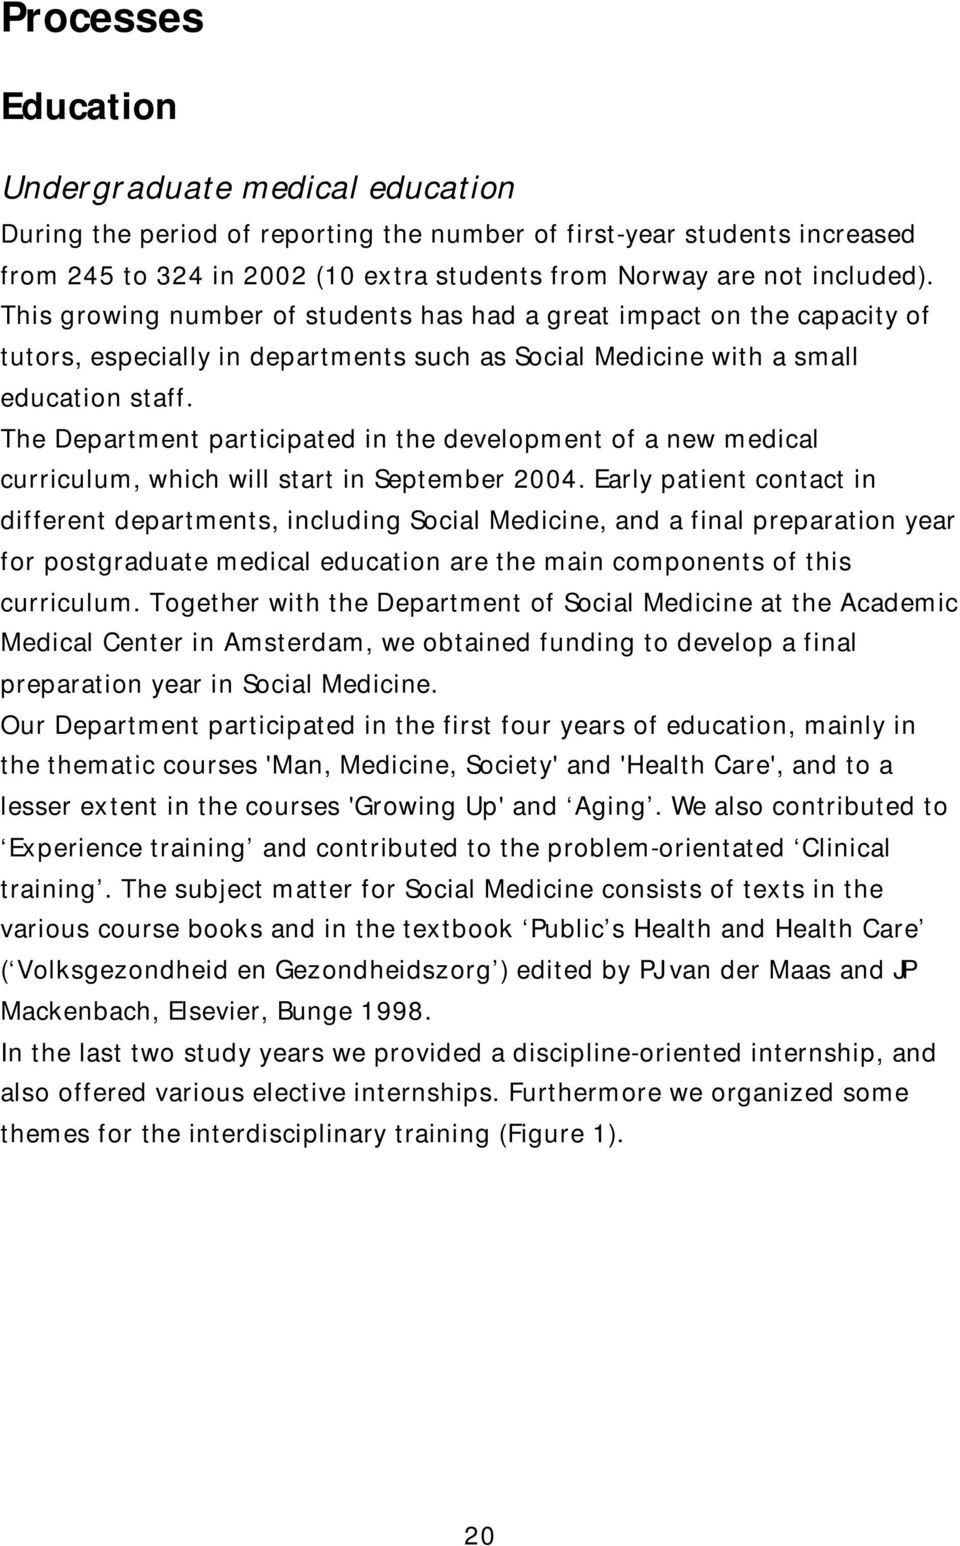 The Department participated in the development of a new medical curriculum, which will start in September 2004.